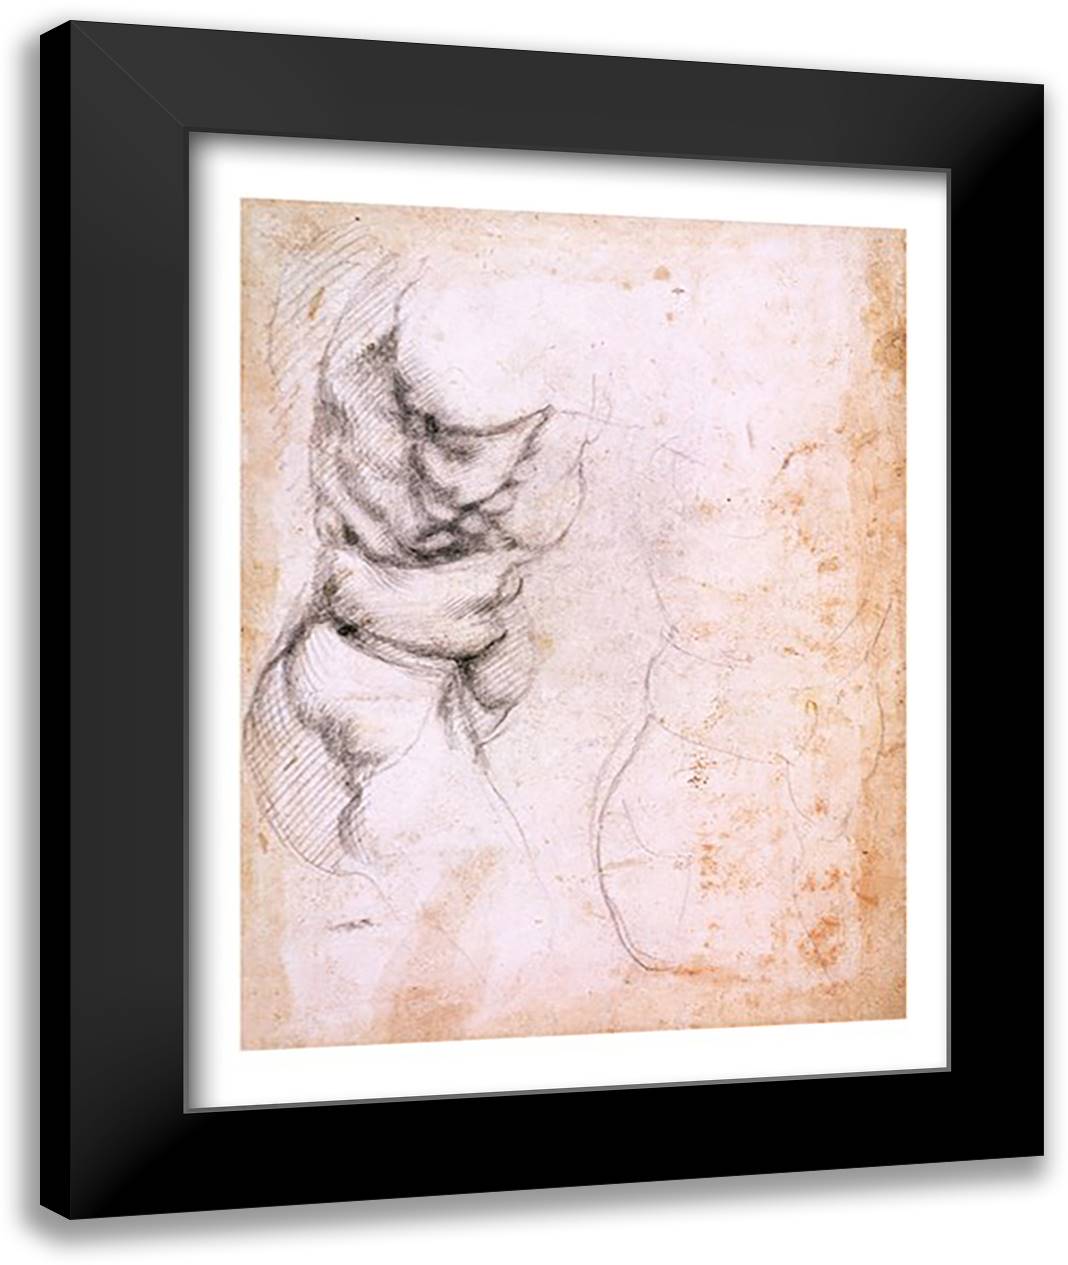 Study of torso and buttock 22x28 Black Modern Wood Framed Art Print Poster by Michelangelo